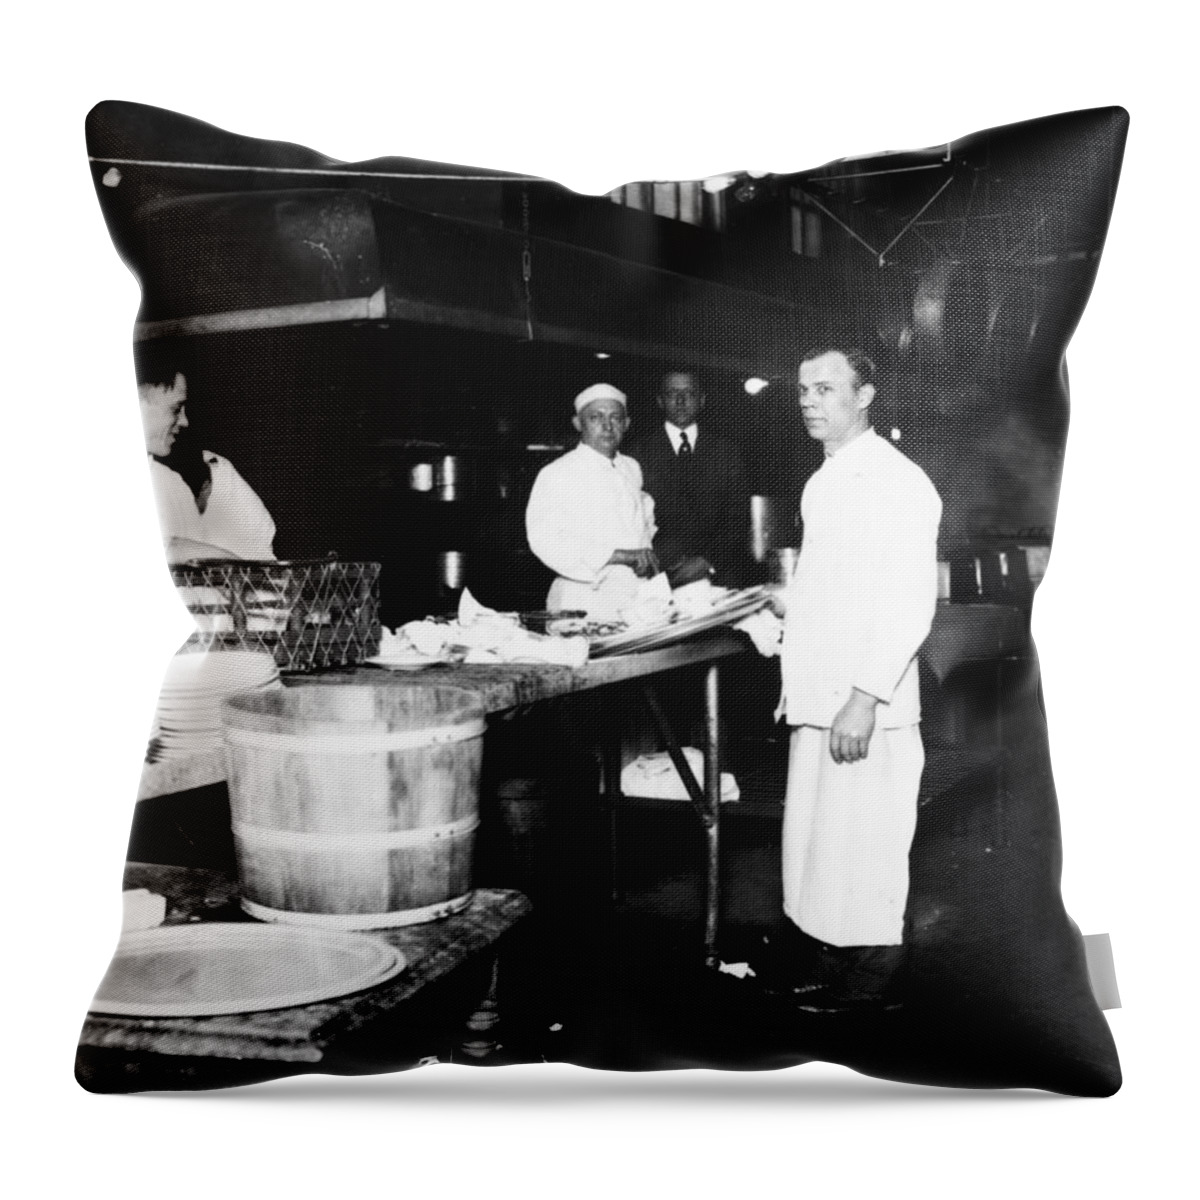 1920 Throw Pillow featuring the photograph Ellis Island Kitchen by Granger